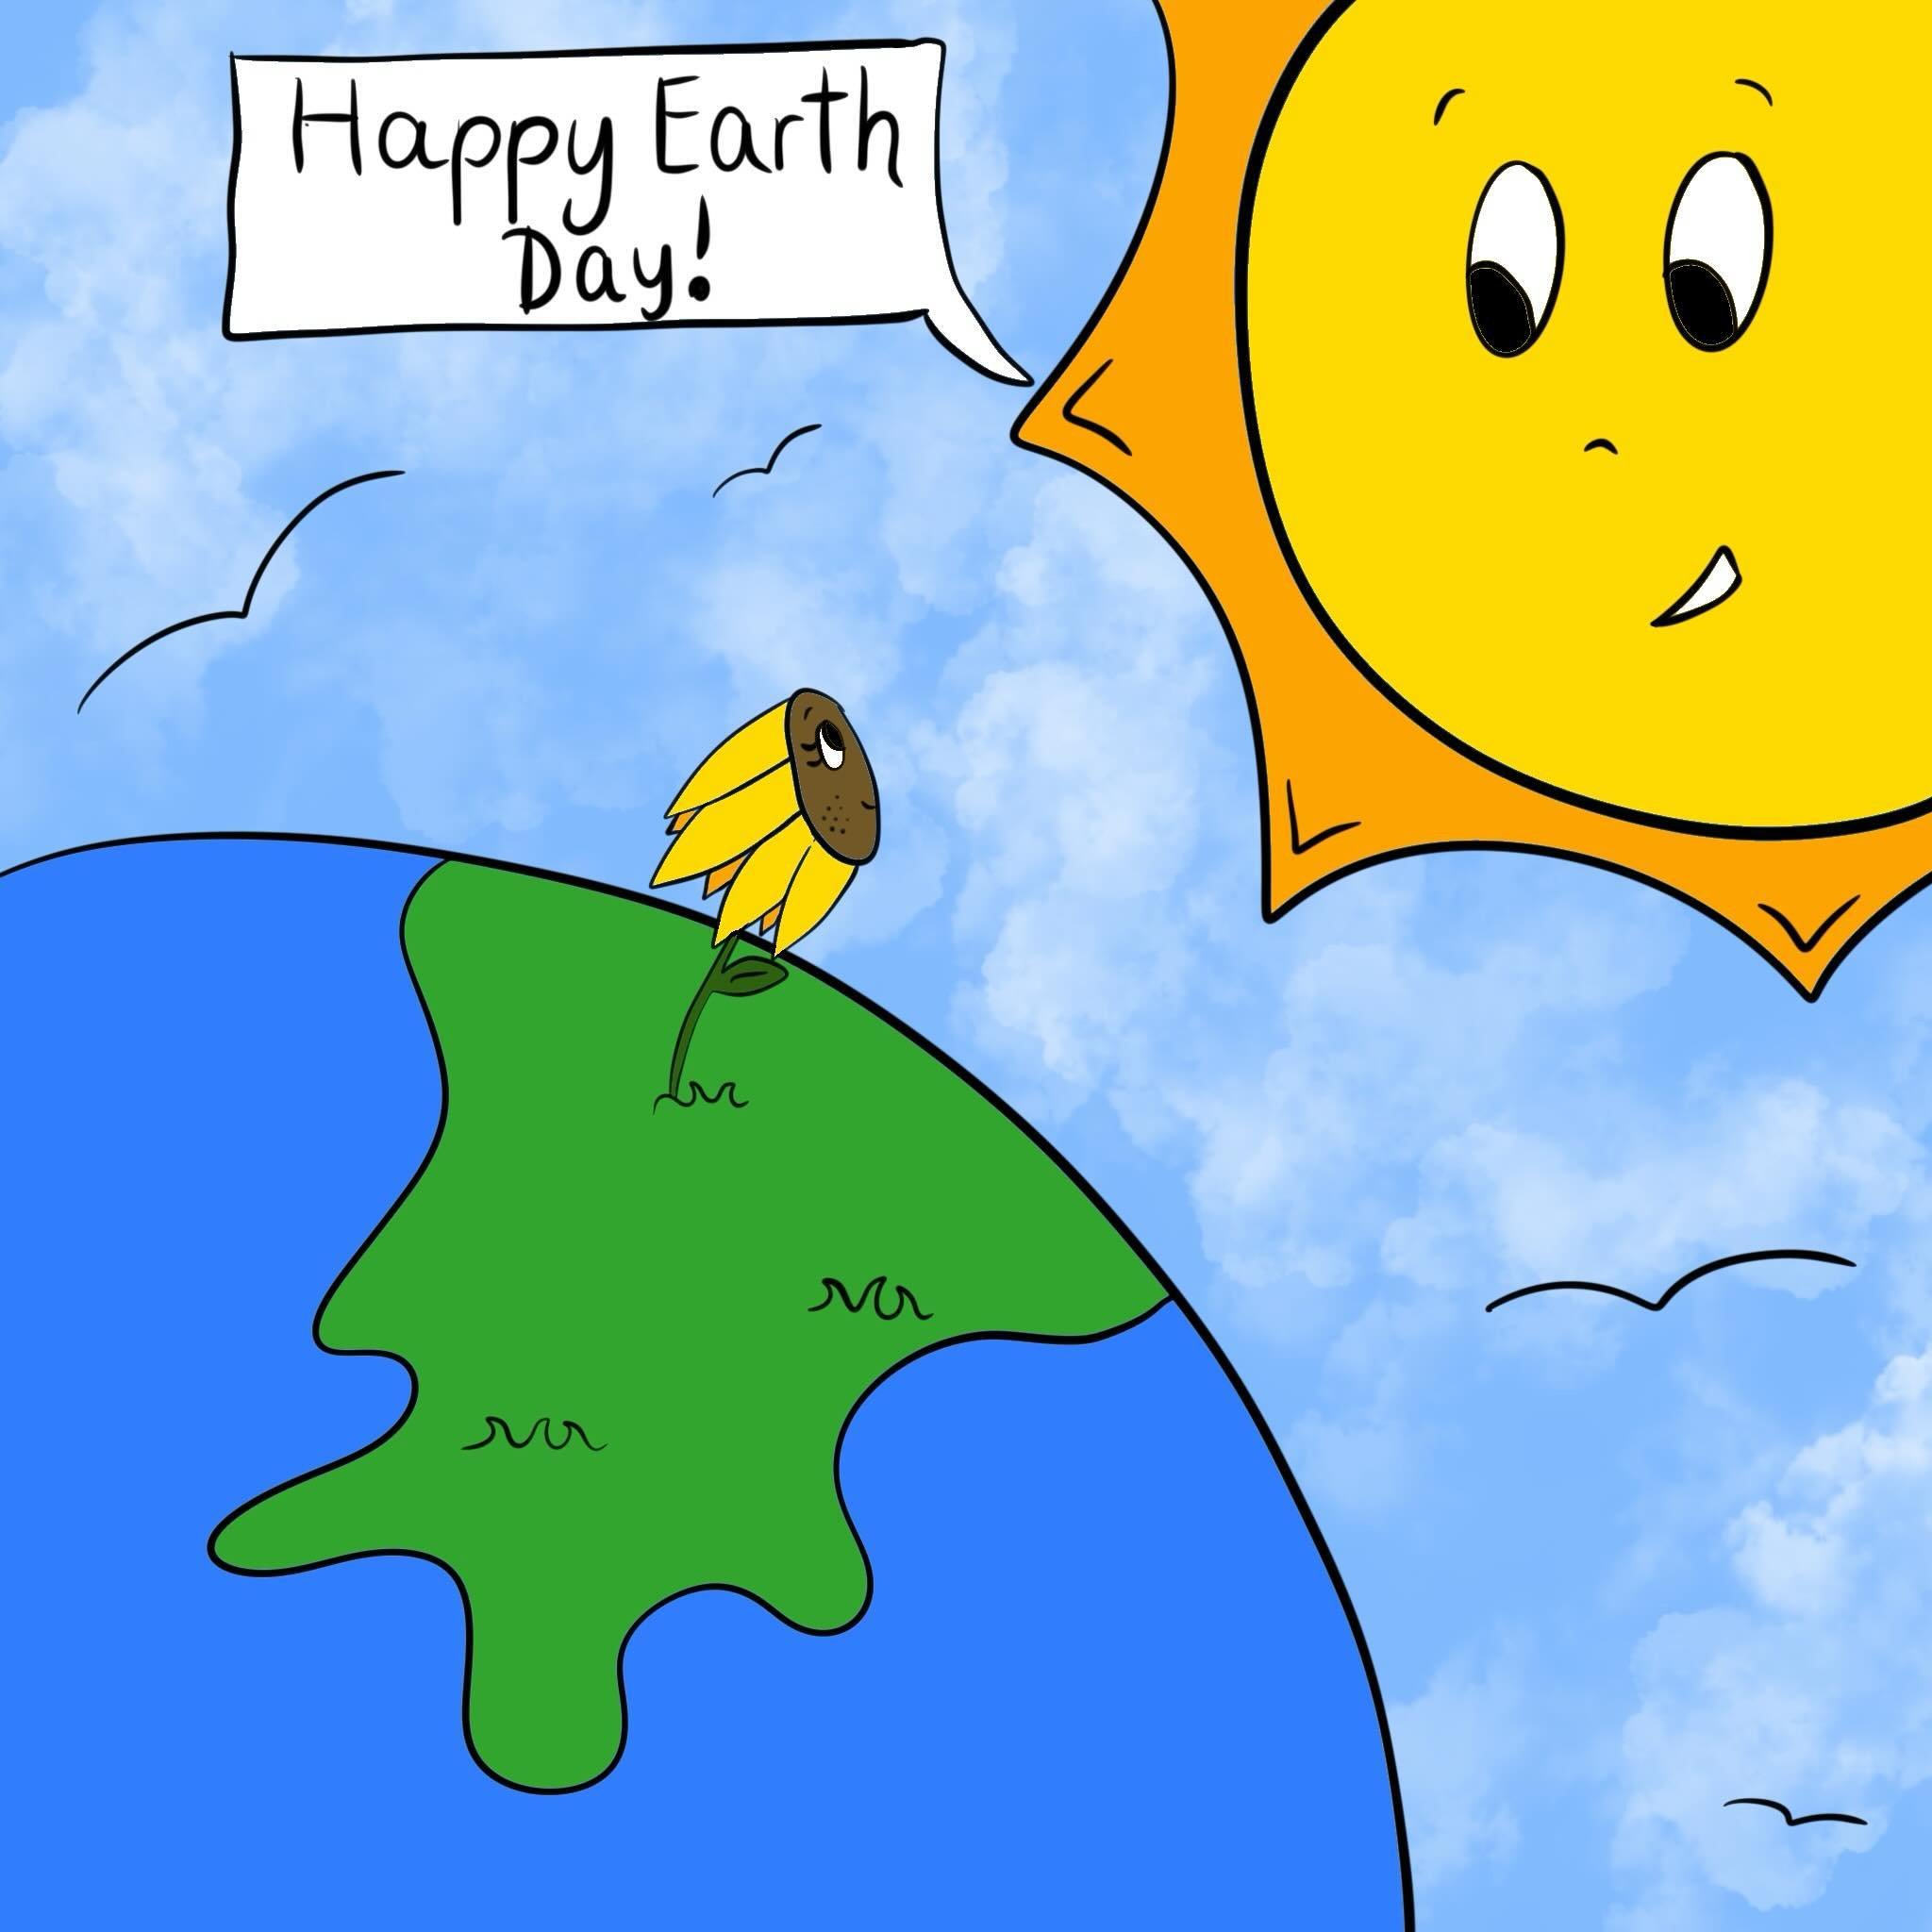 Happy Earth Day! 🌻